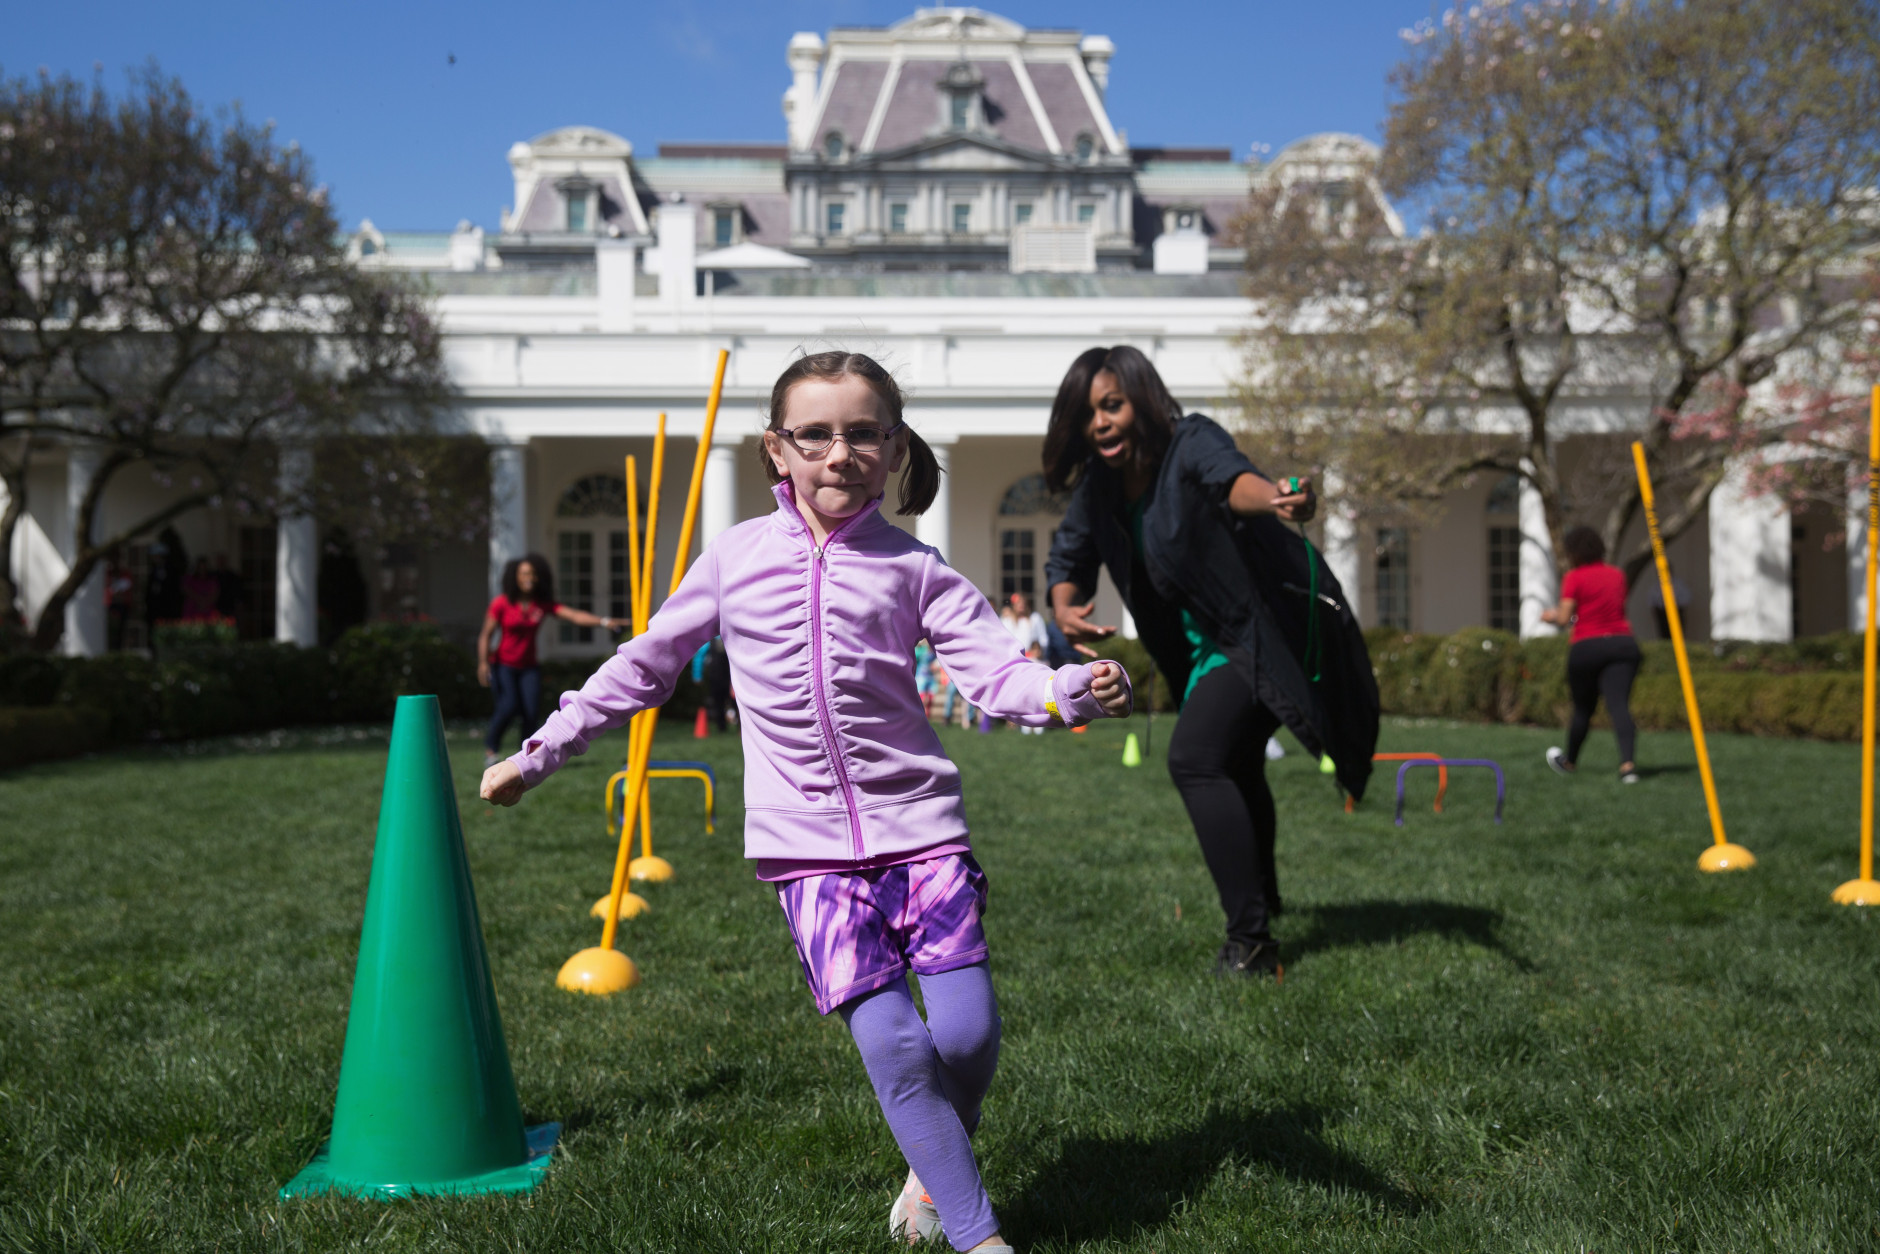 First lady Michelle Obama cheers on children as they run through an obstacle course race in the Rose Garden of the White House in Washington, Monday, March 28, 2016, during the  White House Easter Egg Roll. Thousands of children gathered at the White House for the annual Easter Egg Roll. This year's event features  live music, sports courts, cooking stations, storytelling, and Easter egg rolling. (AP Photo/Andrew Harnik)